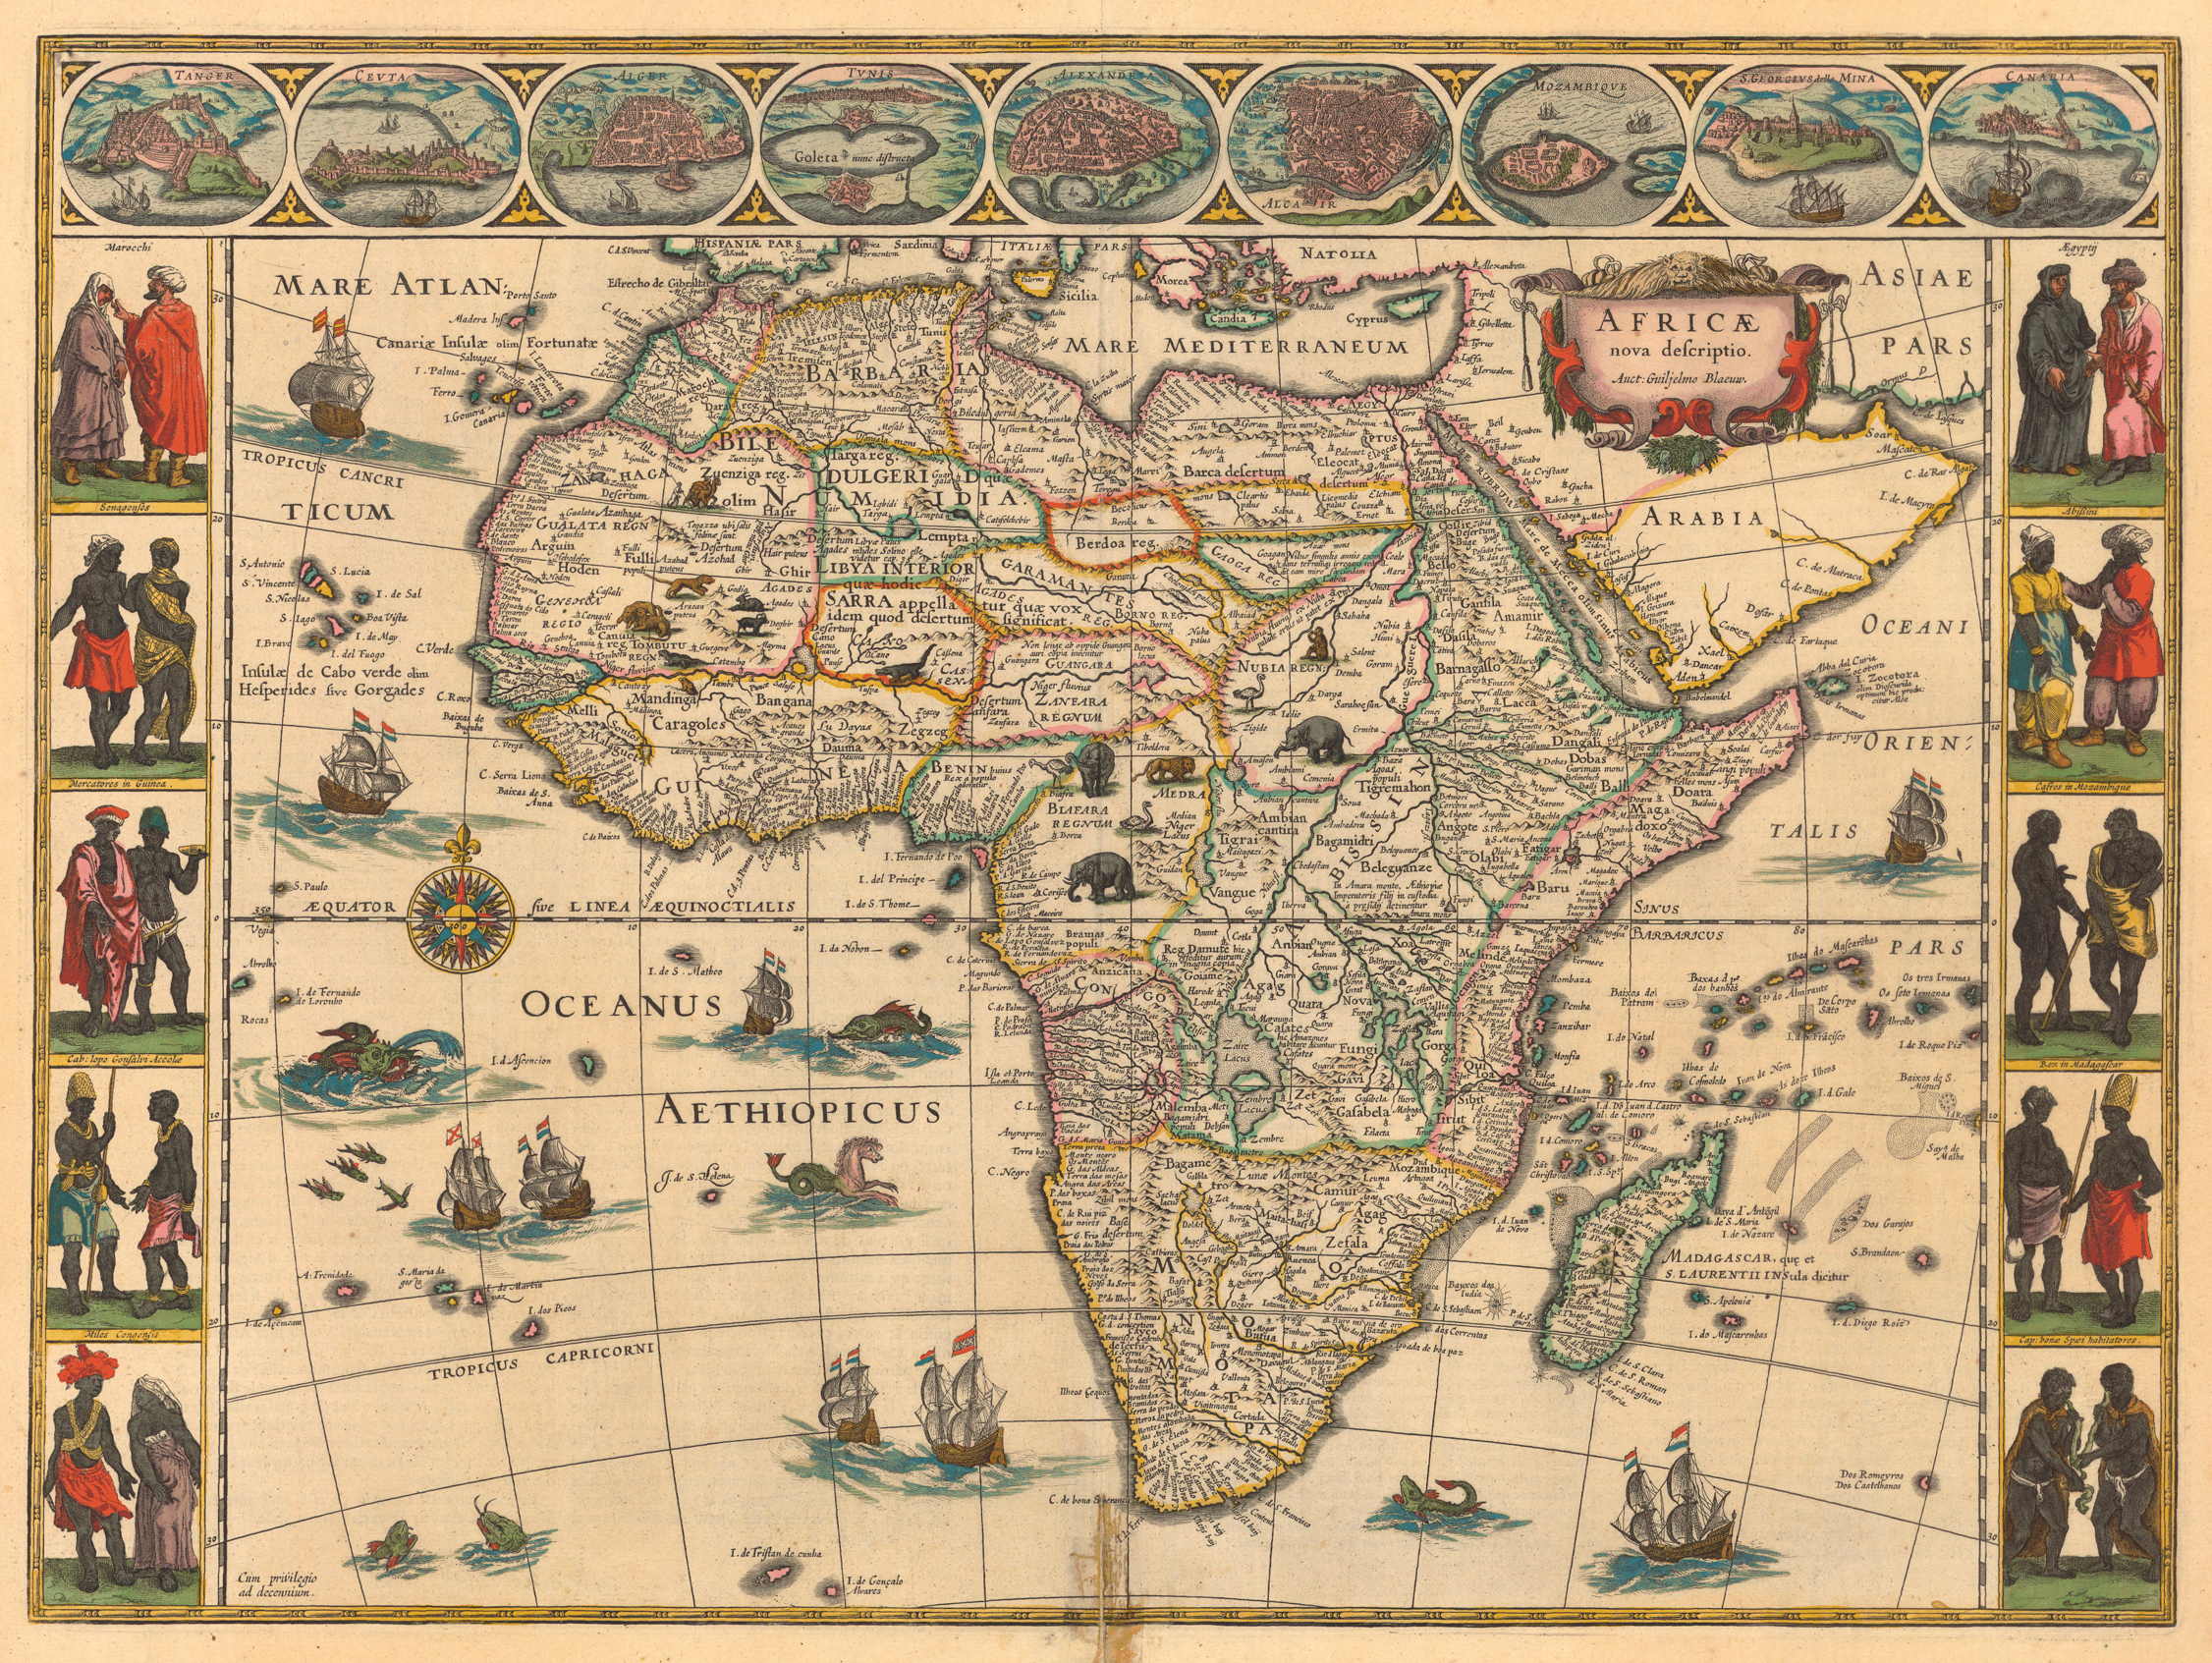 Willem Janszoon Blaeu’s 1644 map of Africa, in which uncharted regions are obscured by illustrations of African fauna. Retrieved from [8].